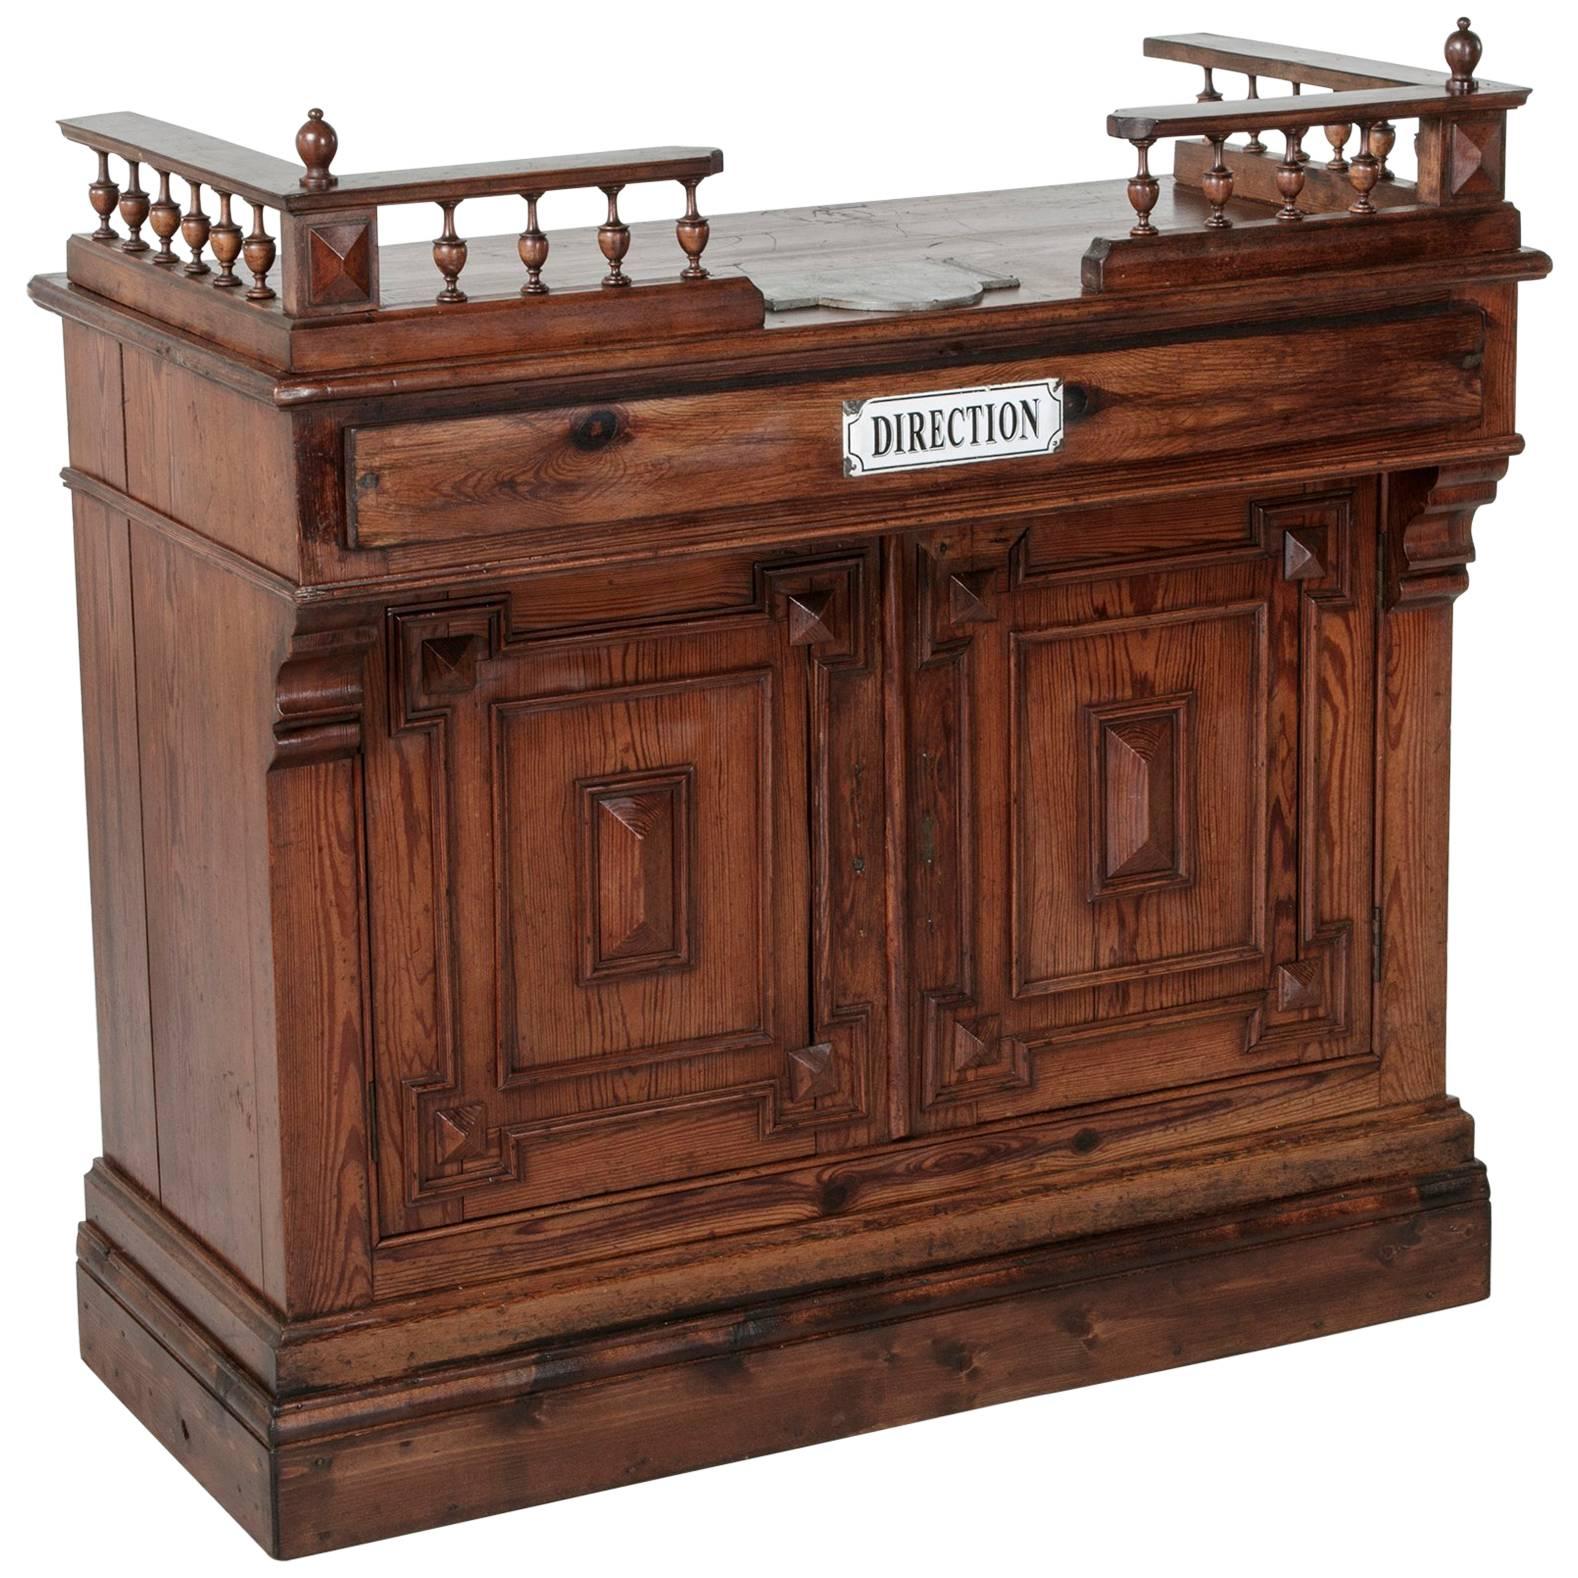 French Pitch Pine Shop Counter or Dry Bar with Spooled Gallery, circa 1900